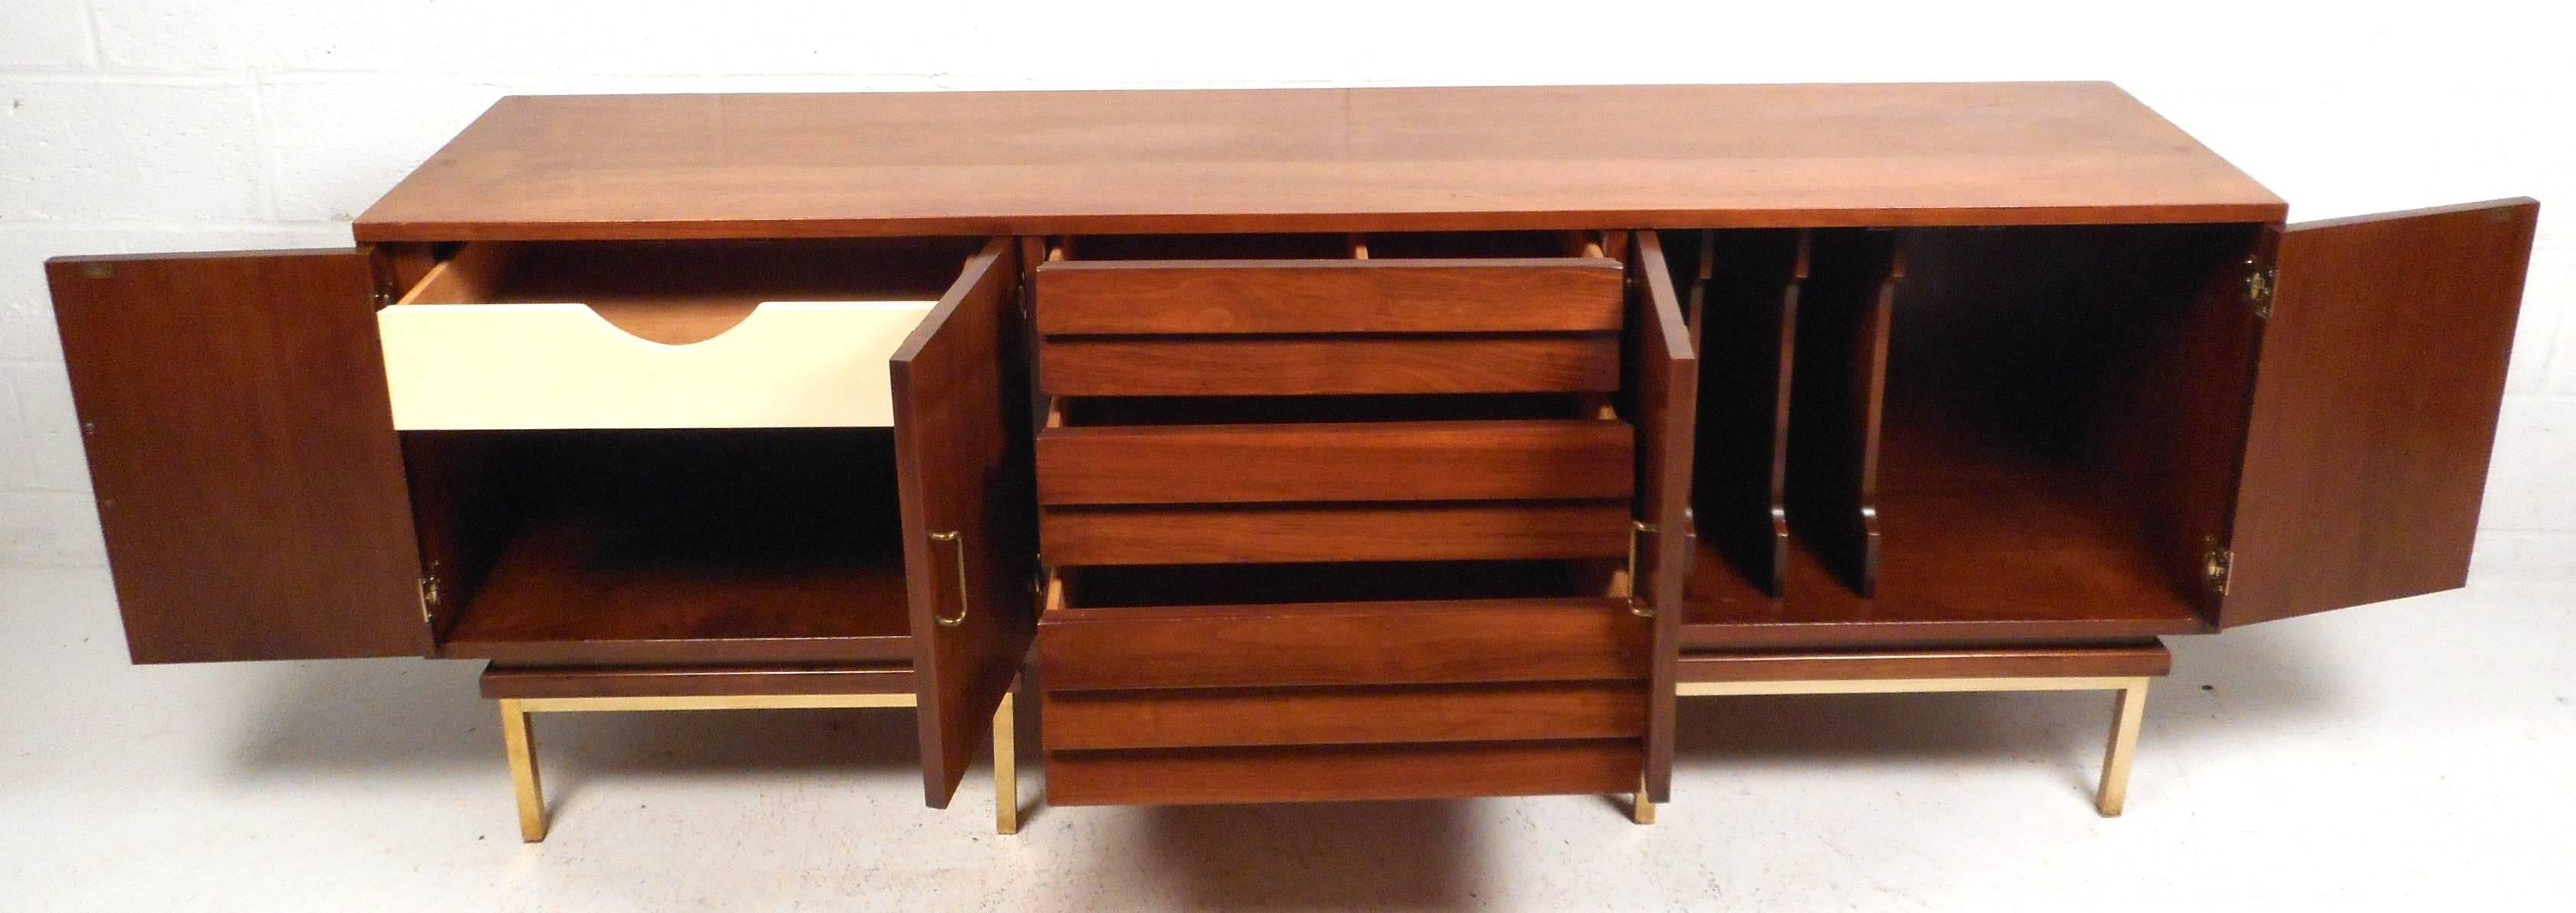 Mid-Century Modern Walnut Credenza by American of Martinsville with a Louvered Front For Sale